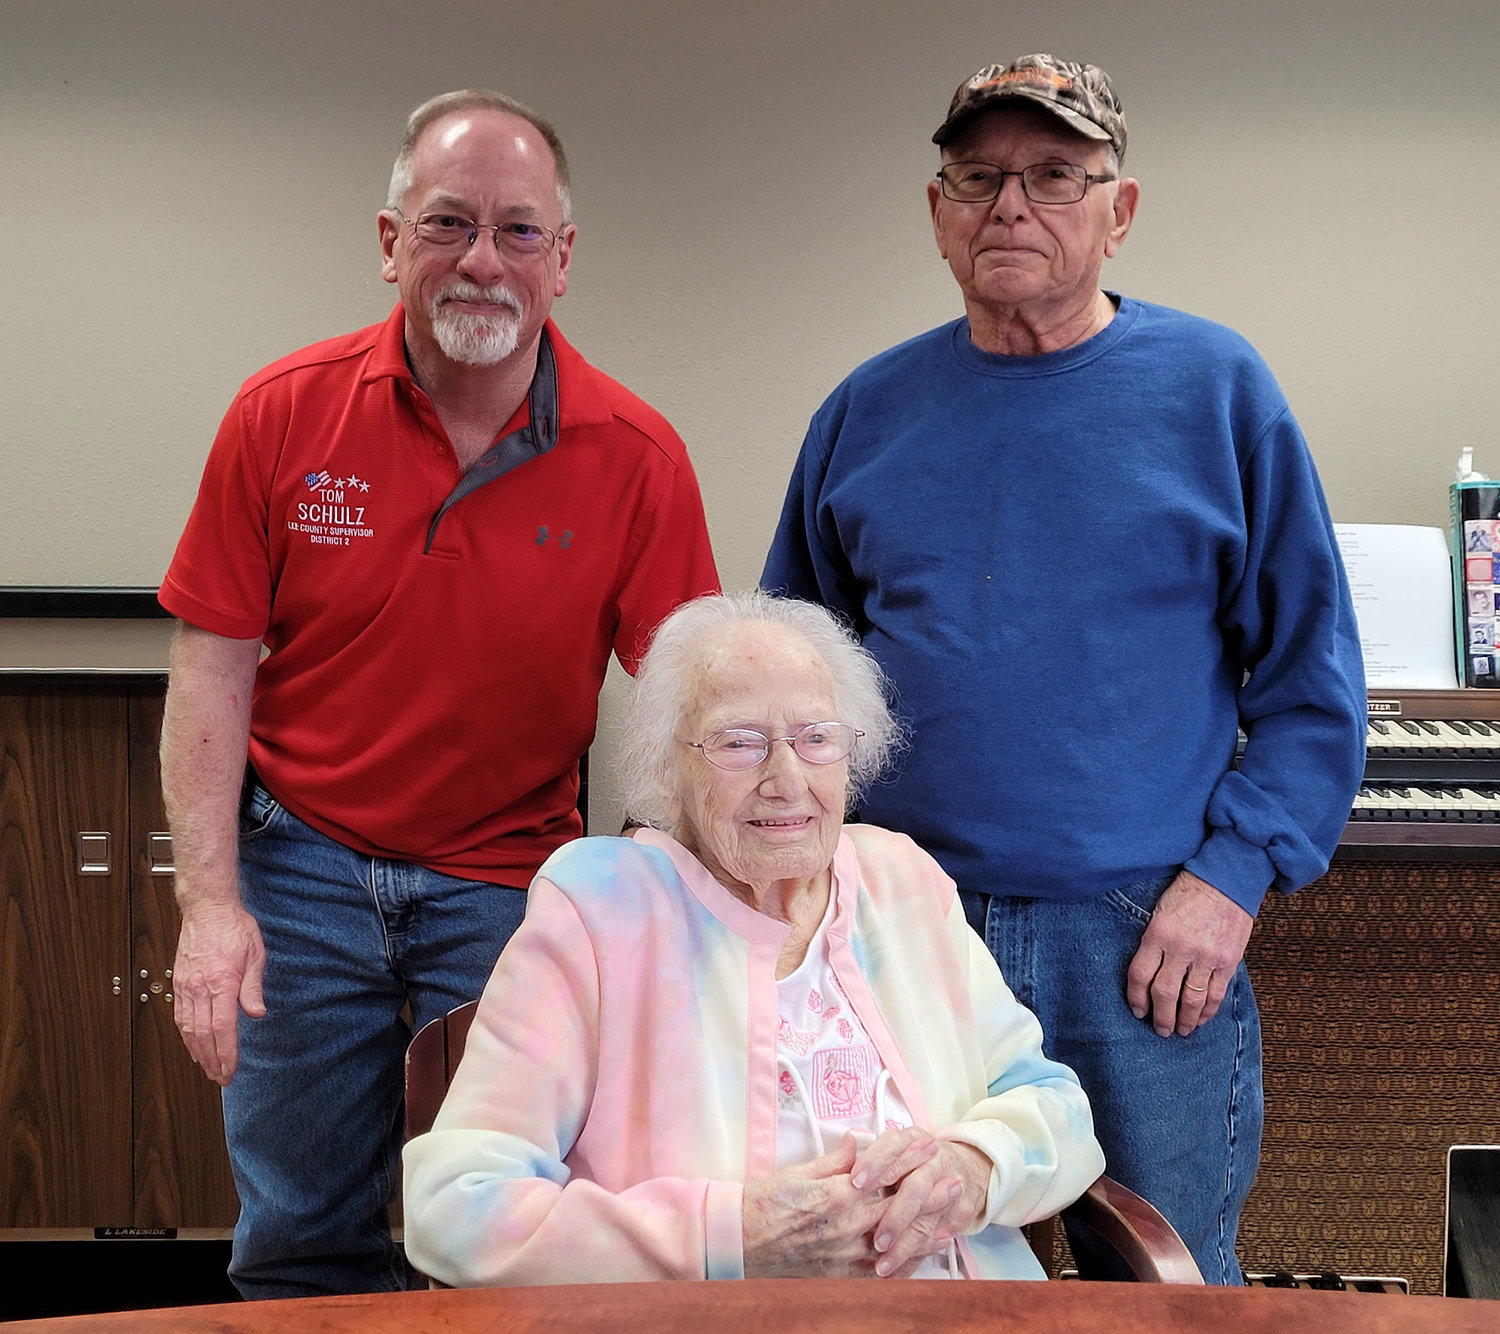 Mildred "Millie" Schulz turns 107 years old on Wednesday. She's joined here by her grandson Tom, upper left, and her son Jerry, upper right.